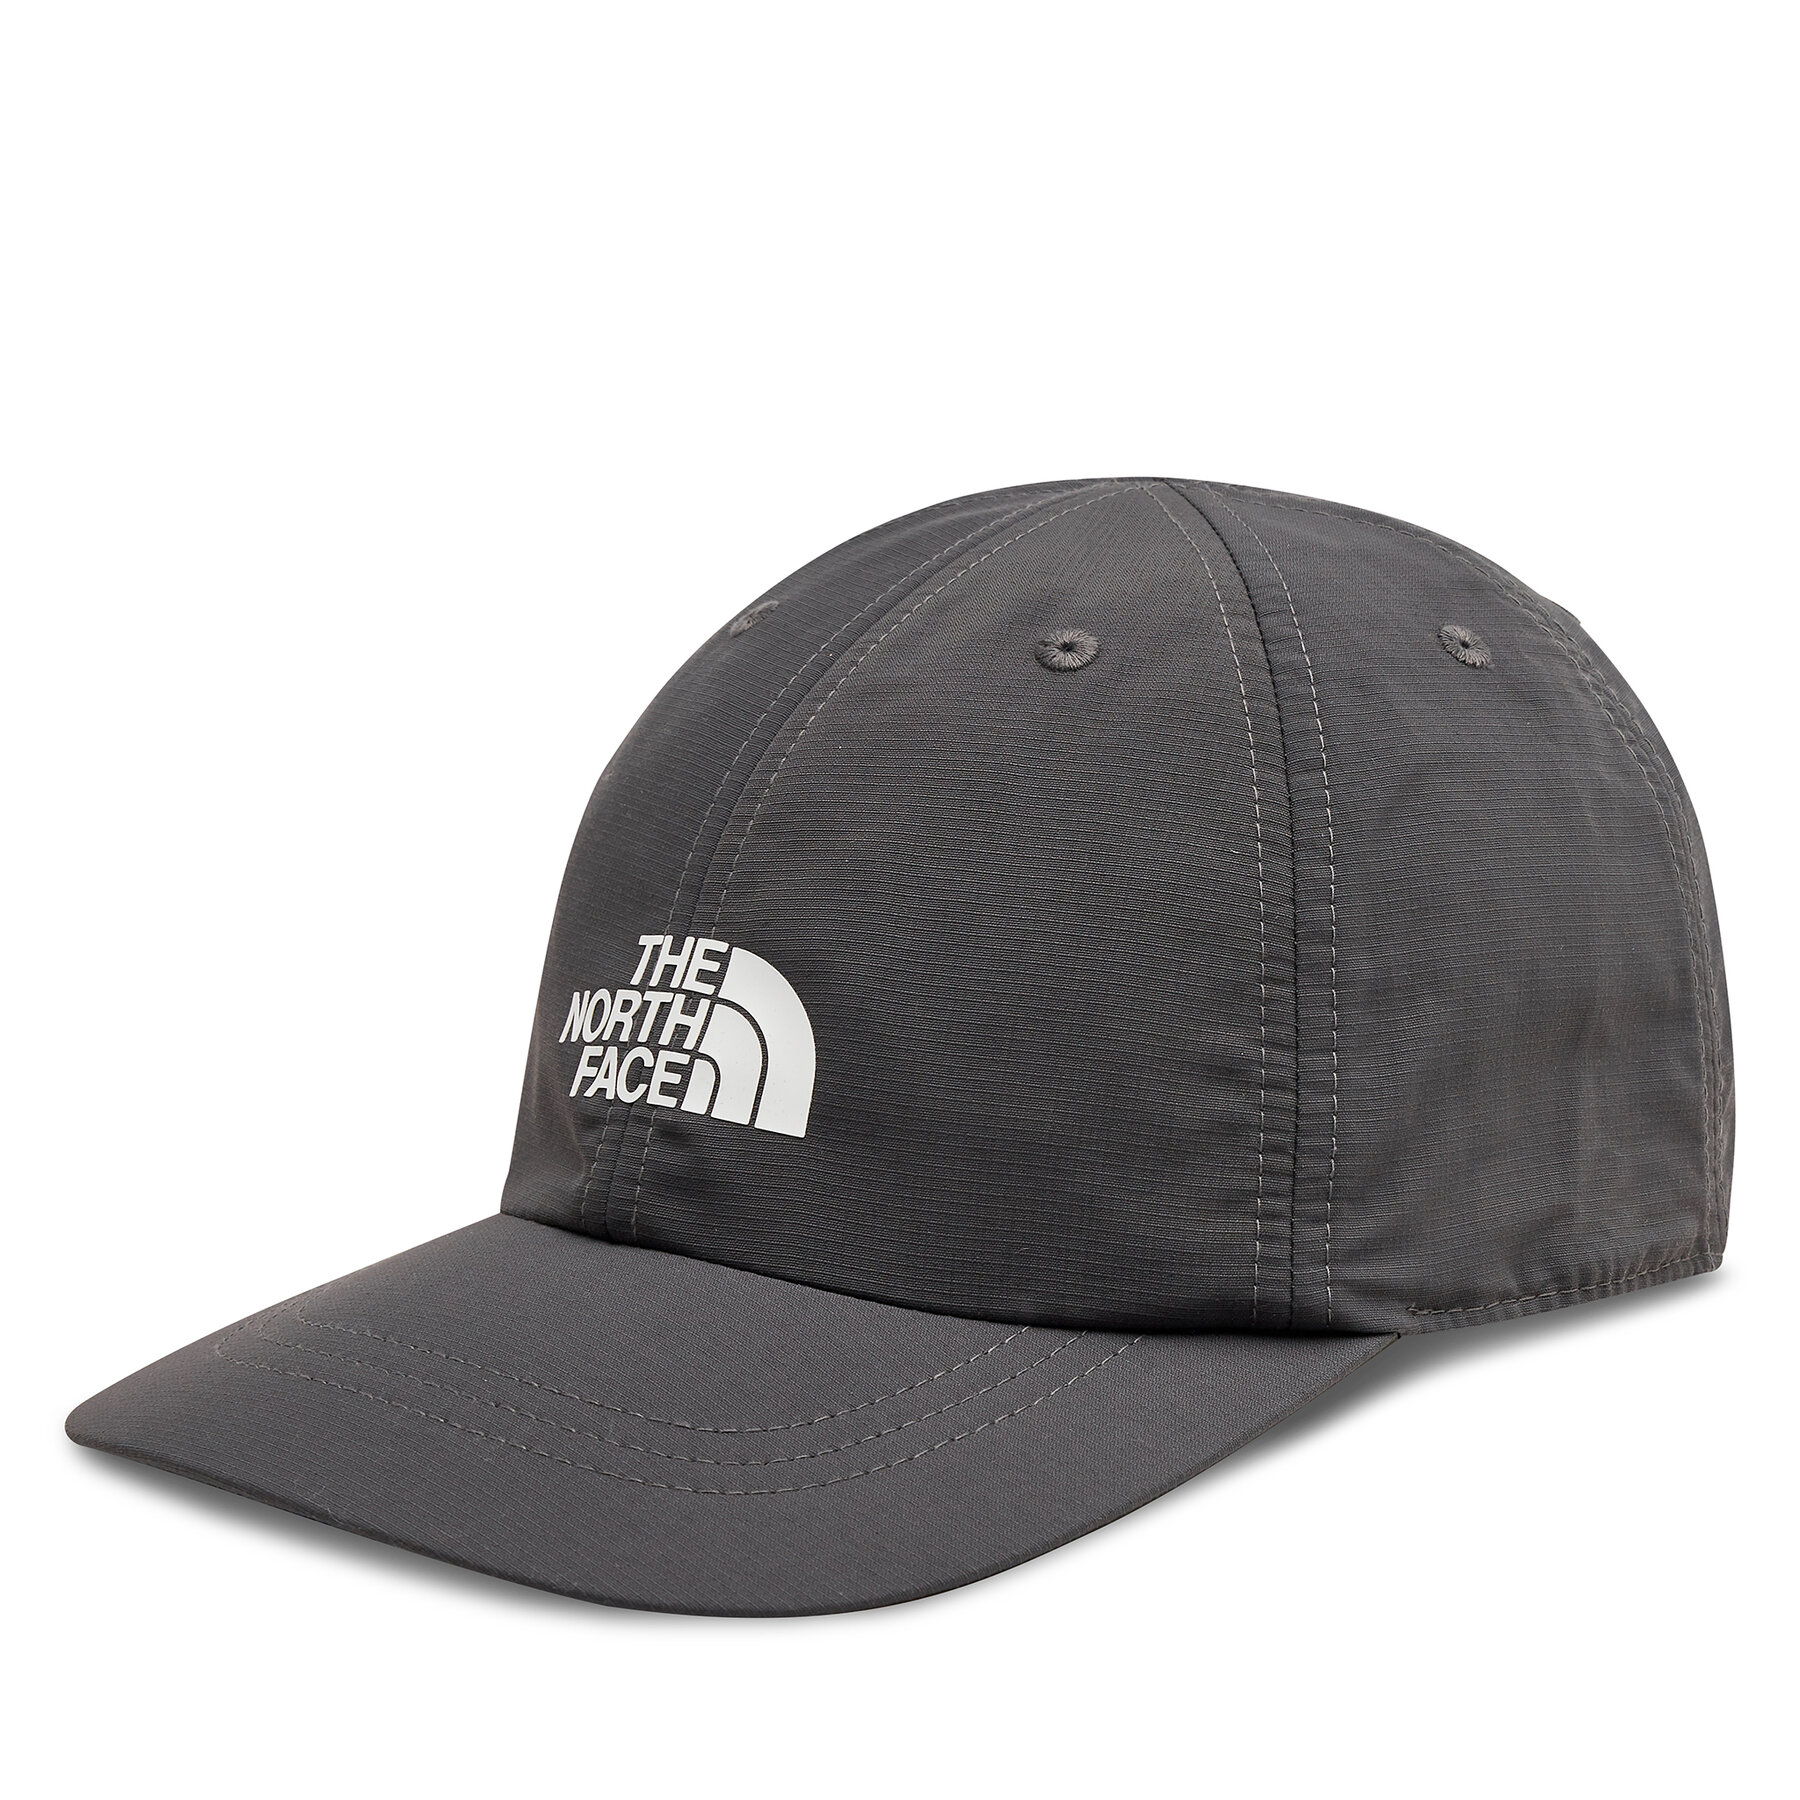 Cap The North Face Horizon NF0A5FXLRHI1 Anthracite Grey von The North Face